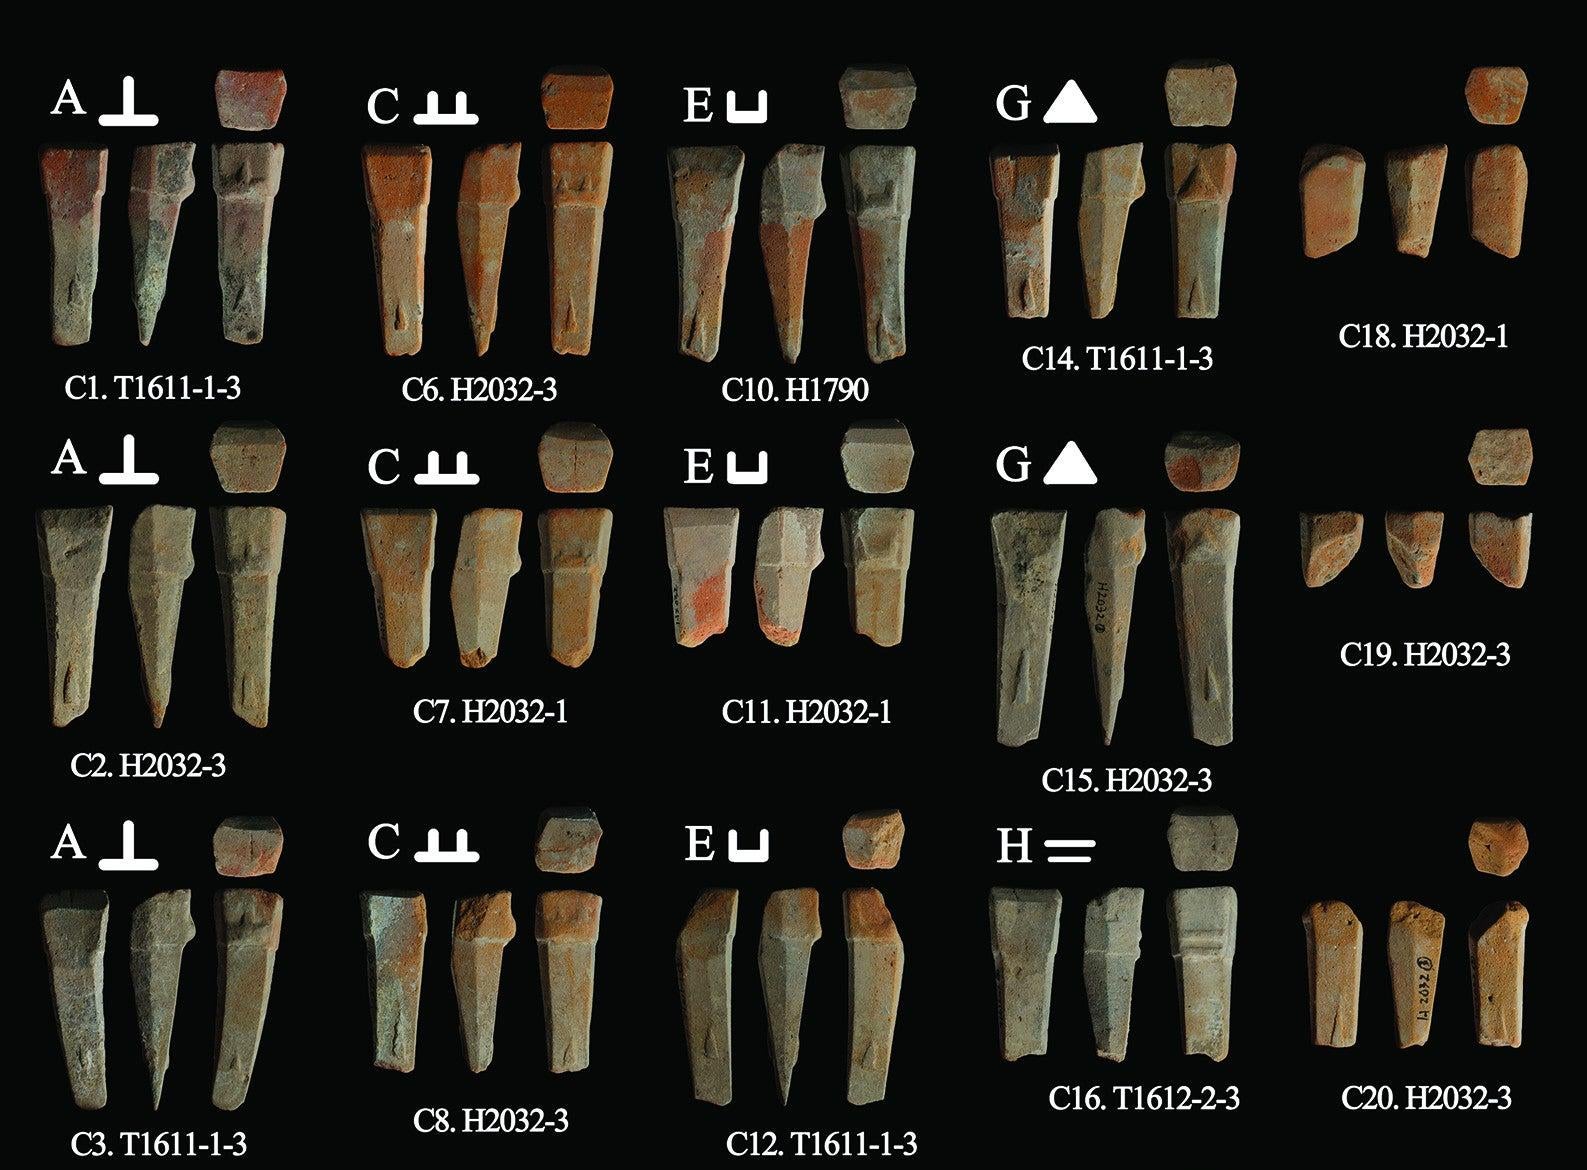 Discarded core heads found at the site.  (Image: H. Zhao et al., 2021/Antiquity)